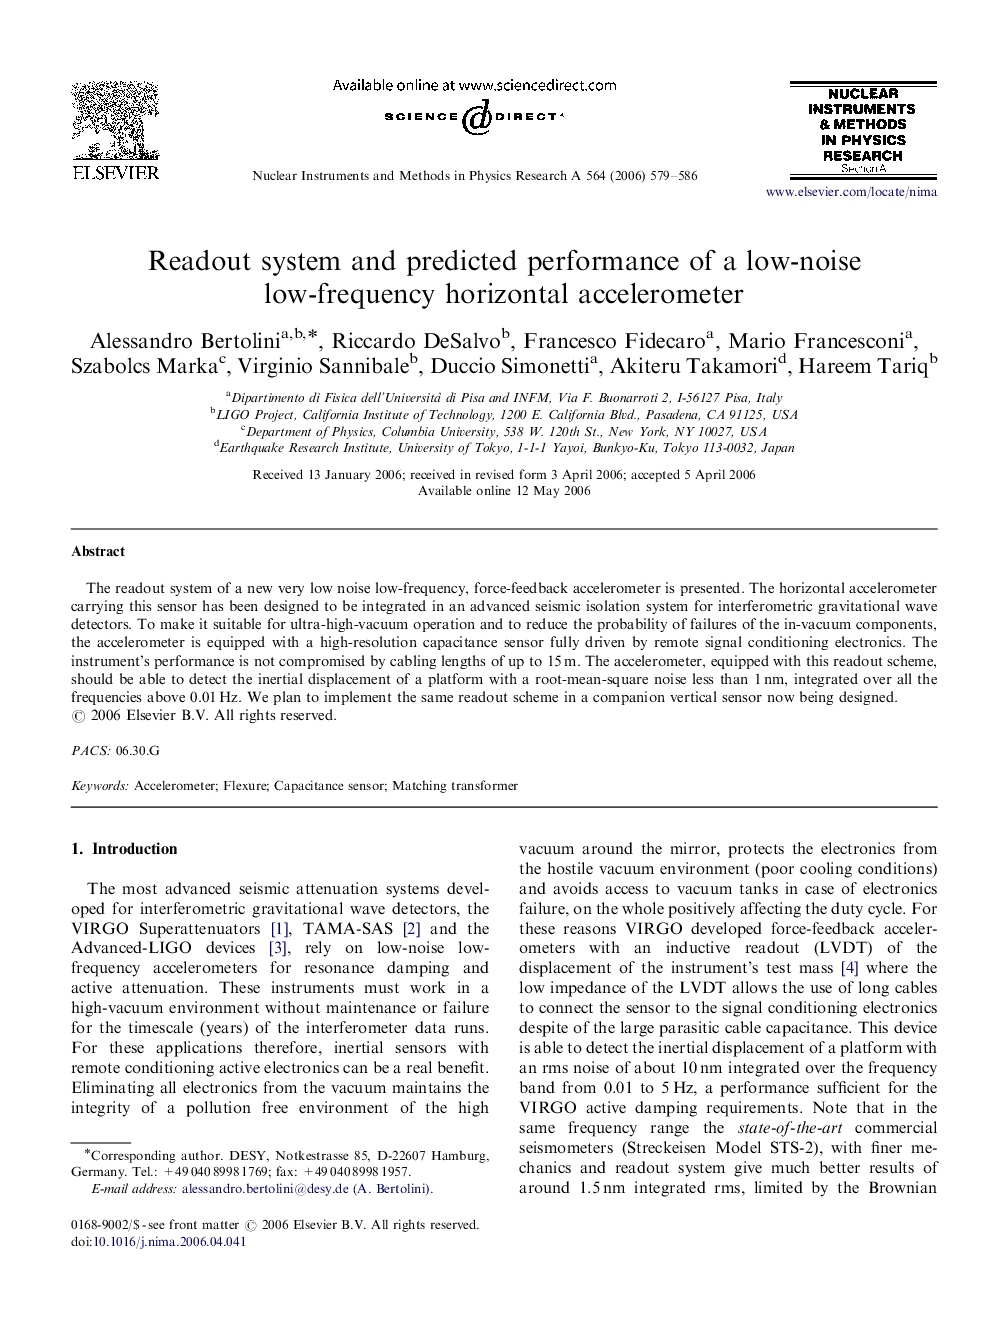 Readout system and predicted performance of a low-noise low-frequency horizontal accelerometer